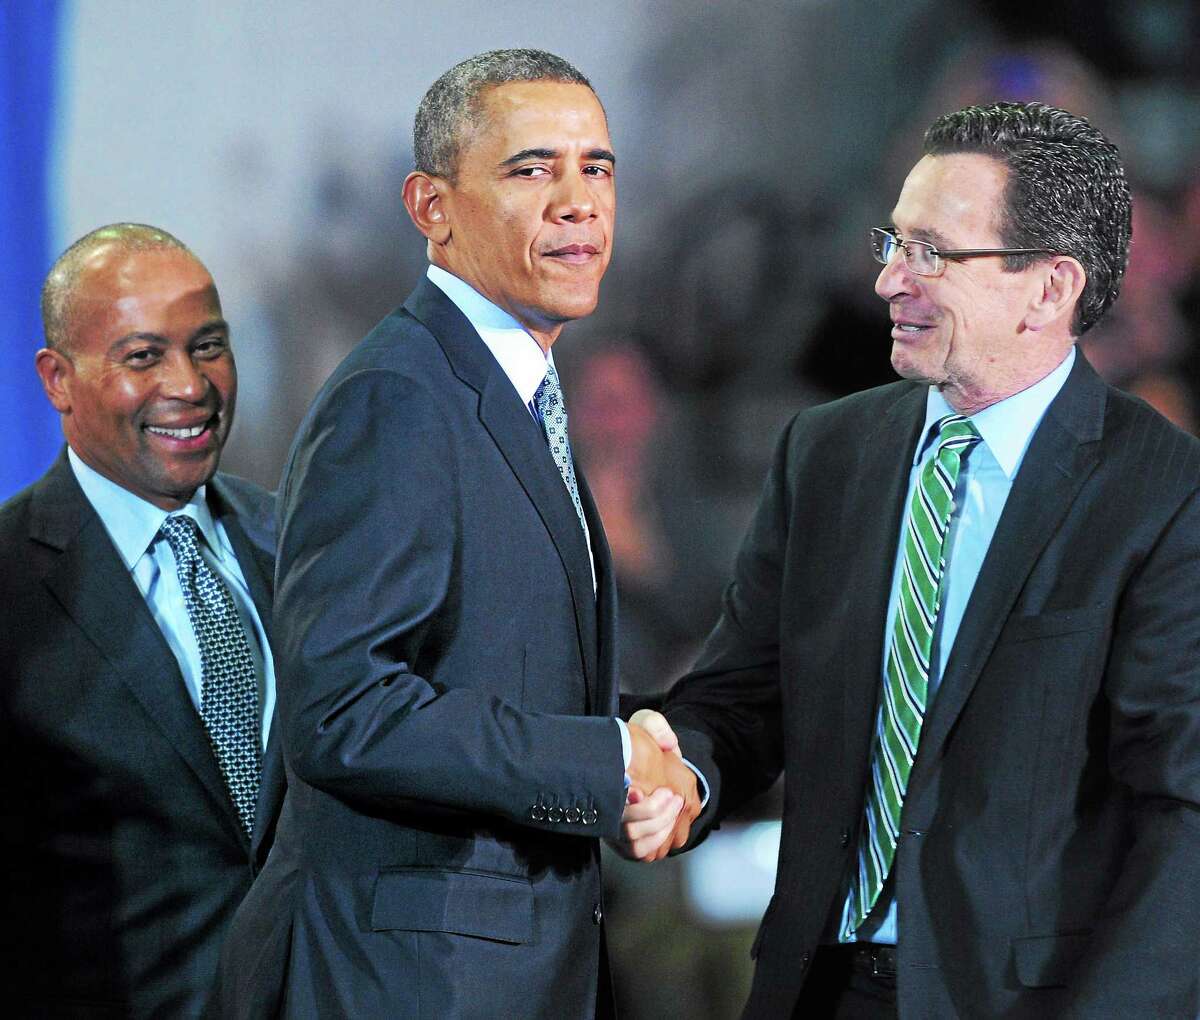 President Barack Obama shakes hands with Gov. Dannel P. Malloy after delivering a speech about raising the minimum wage at Central Connecticut State University in New Britain Wednesday. At left is Massachusetts Gov. Deval Patrick.